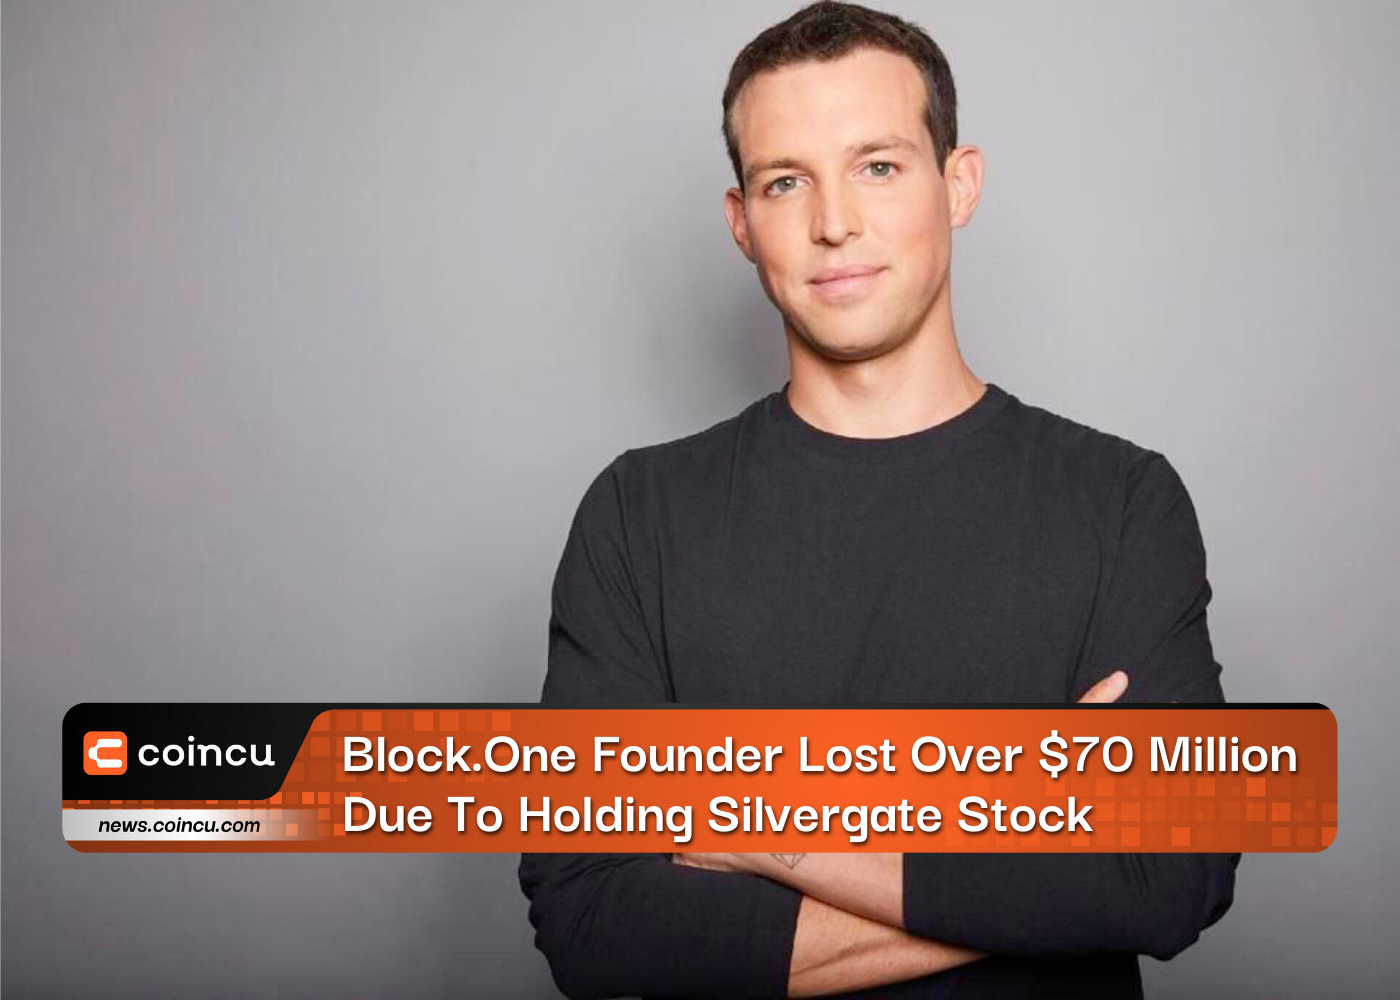 Block.One Founder Lost Over $70 Million Due To Holding Silvergate Stock